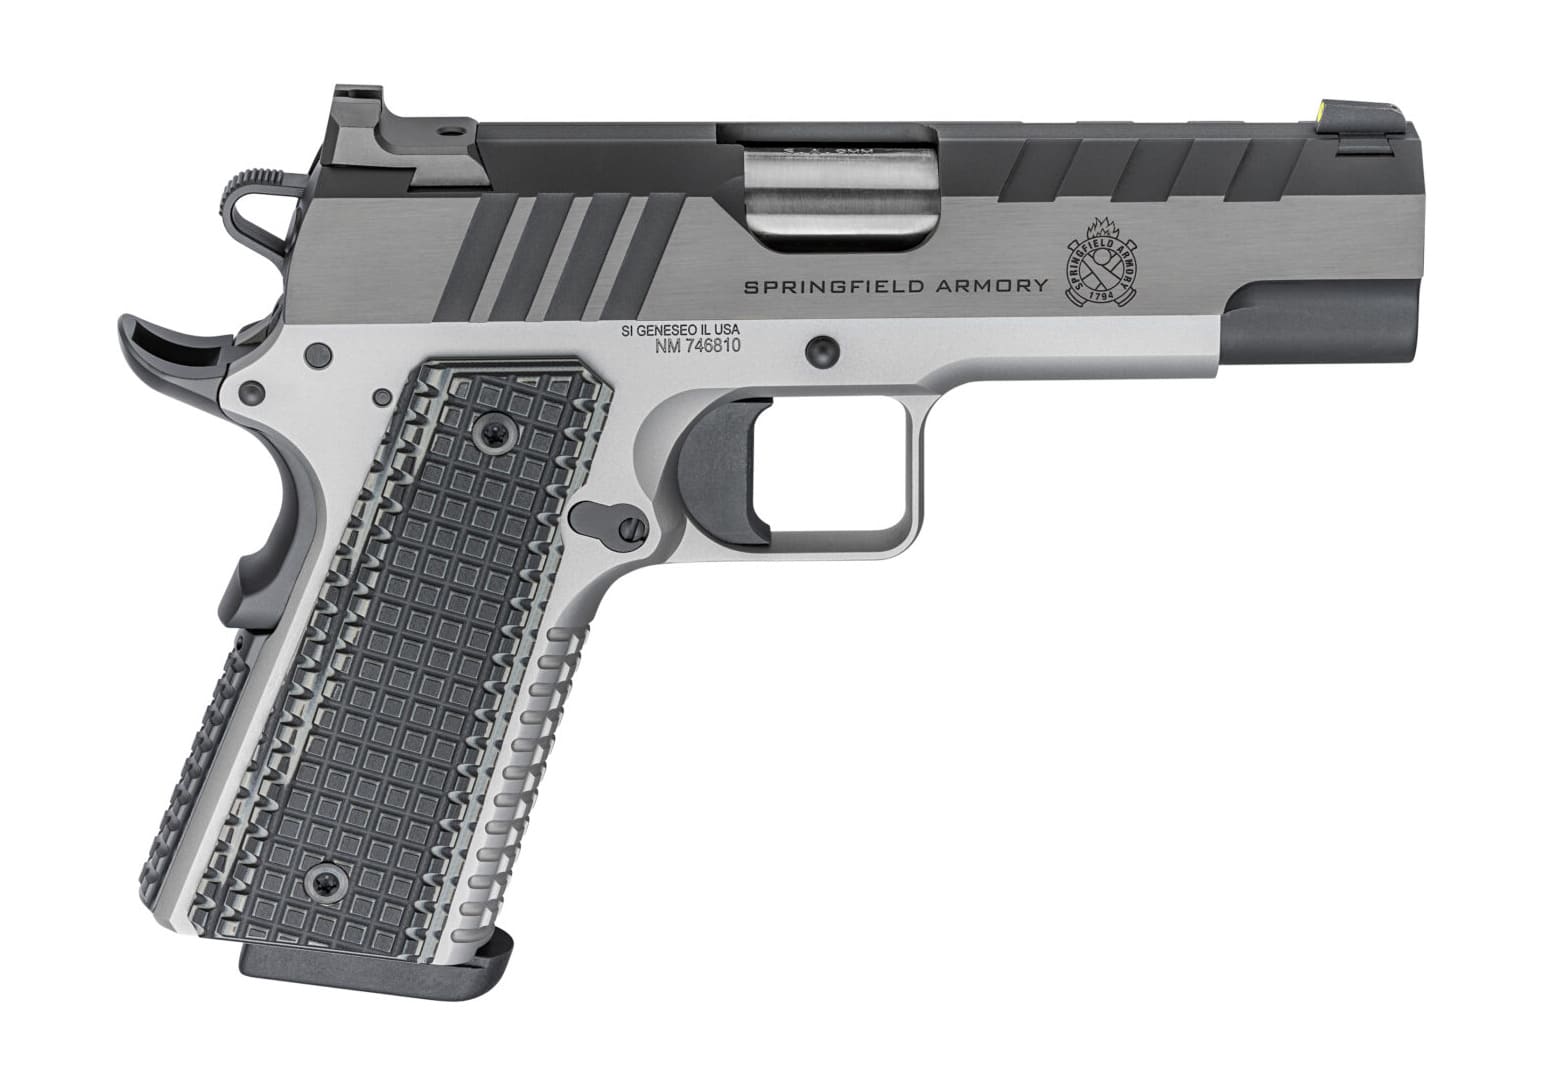 Springfield Armory 1911 Emissary 4.25" pistol chambered in 9mm